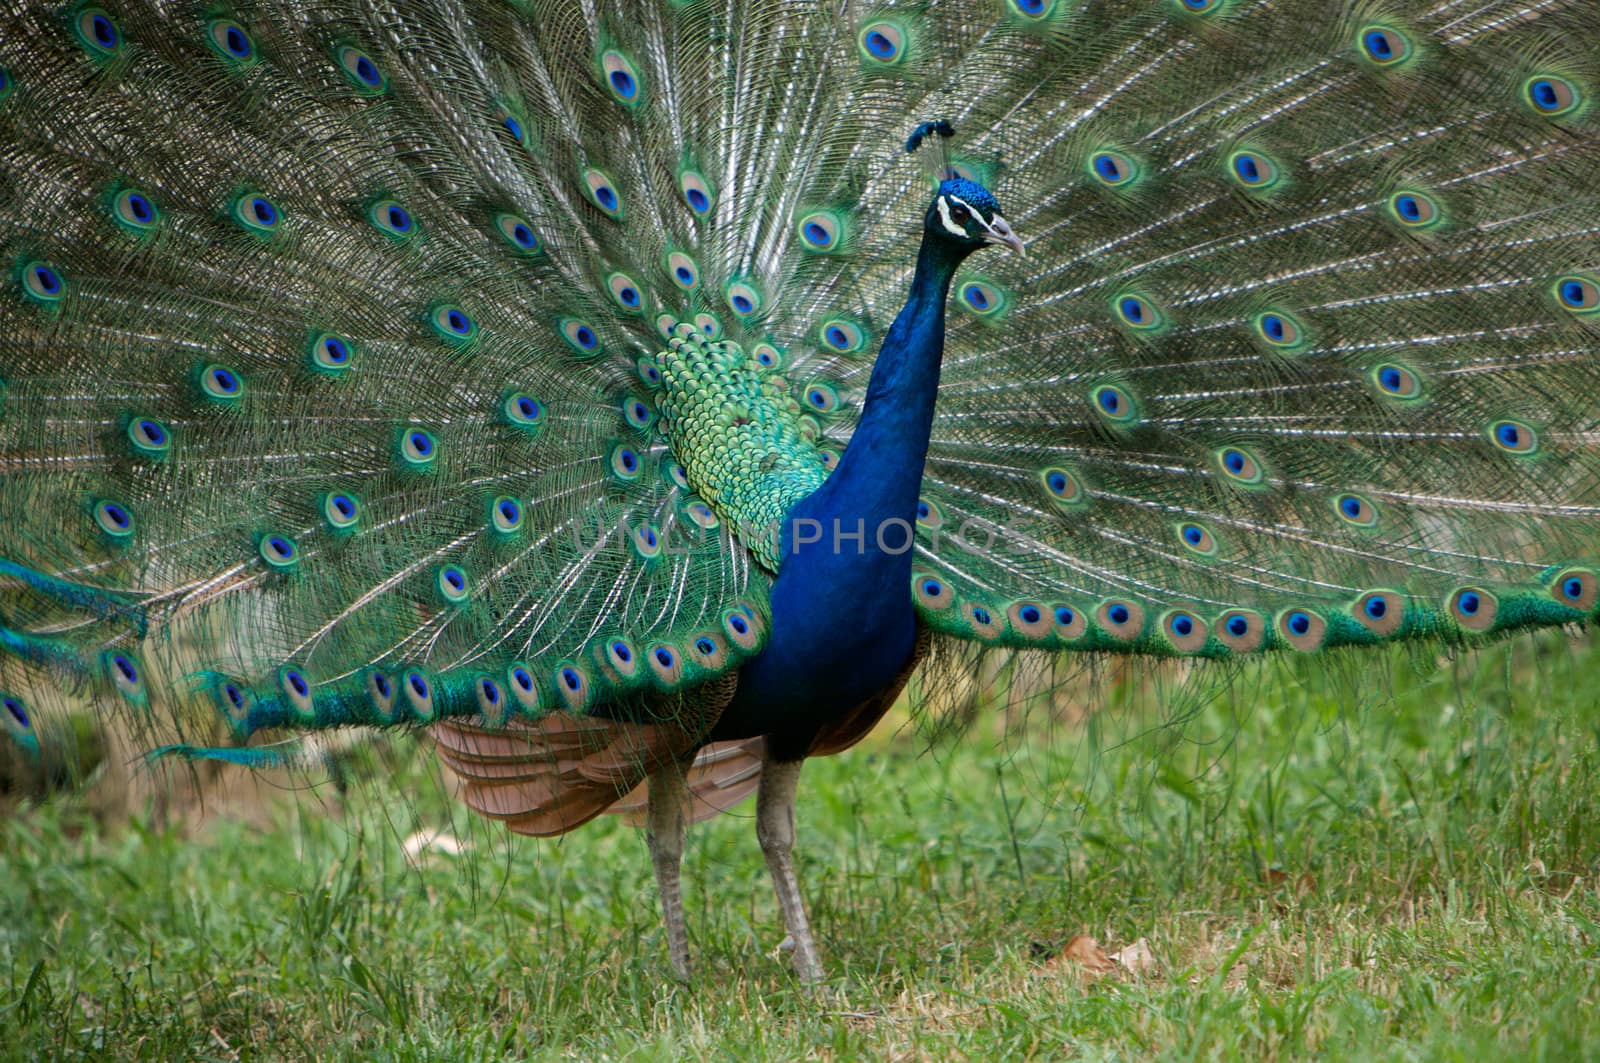 Peacock with beautiful colourful feathers